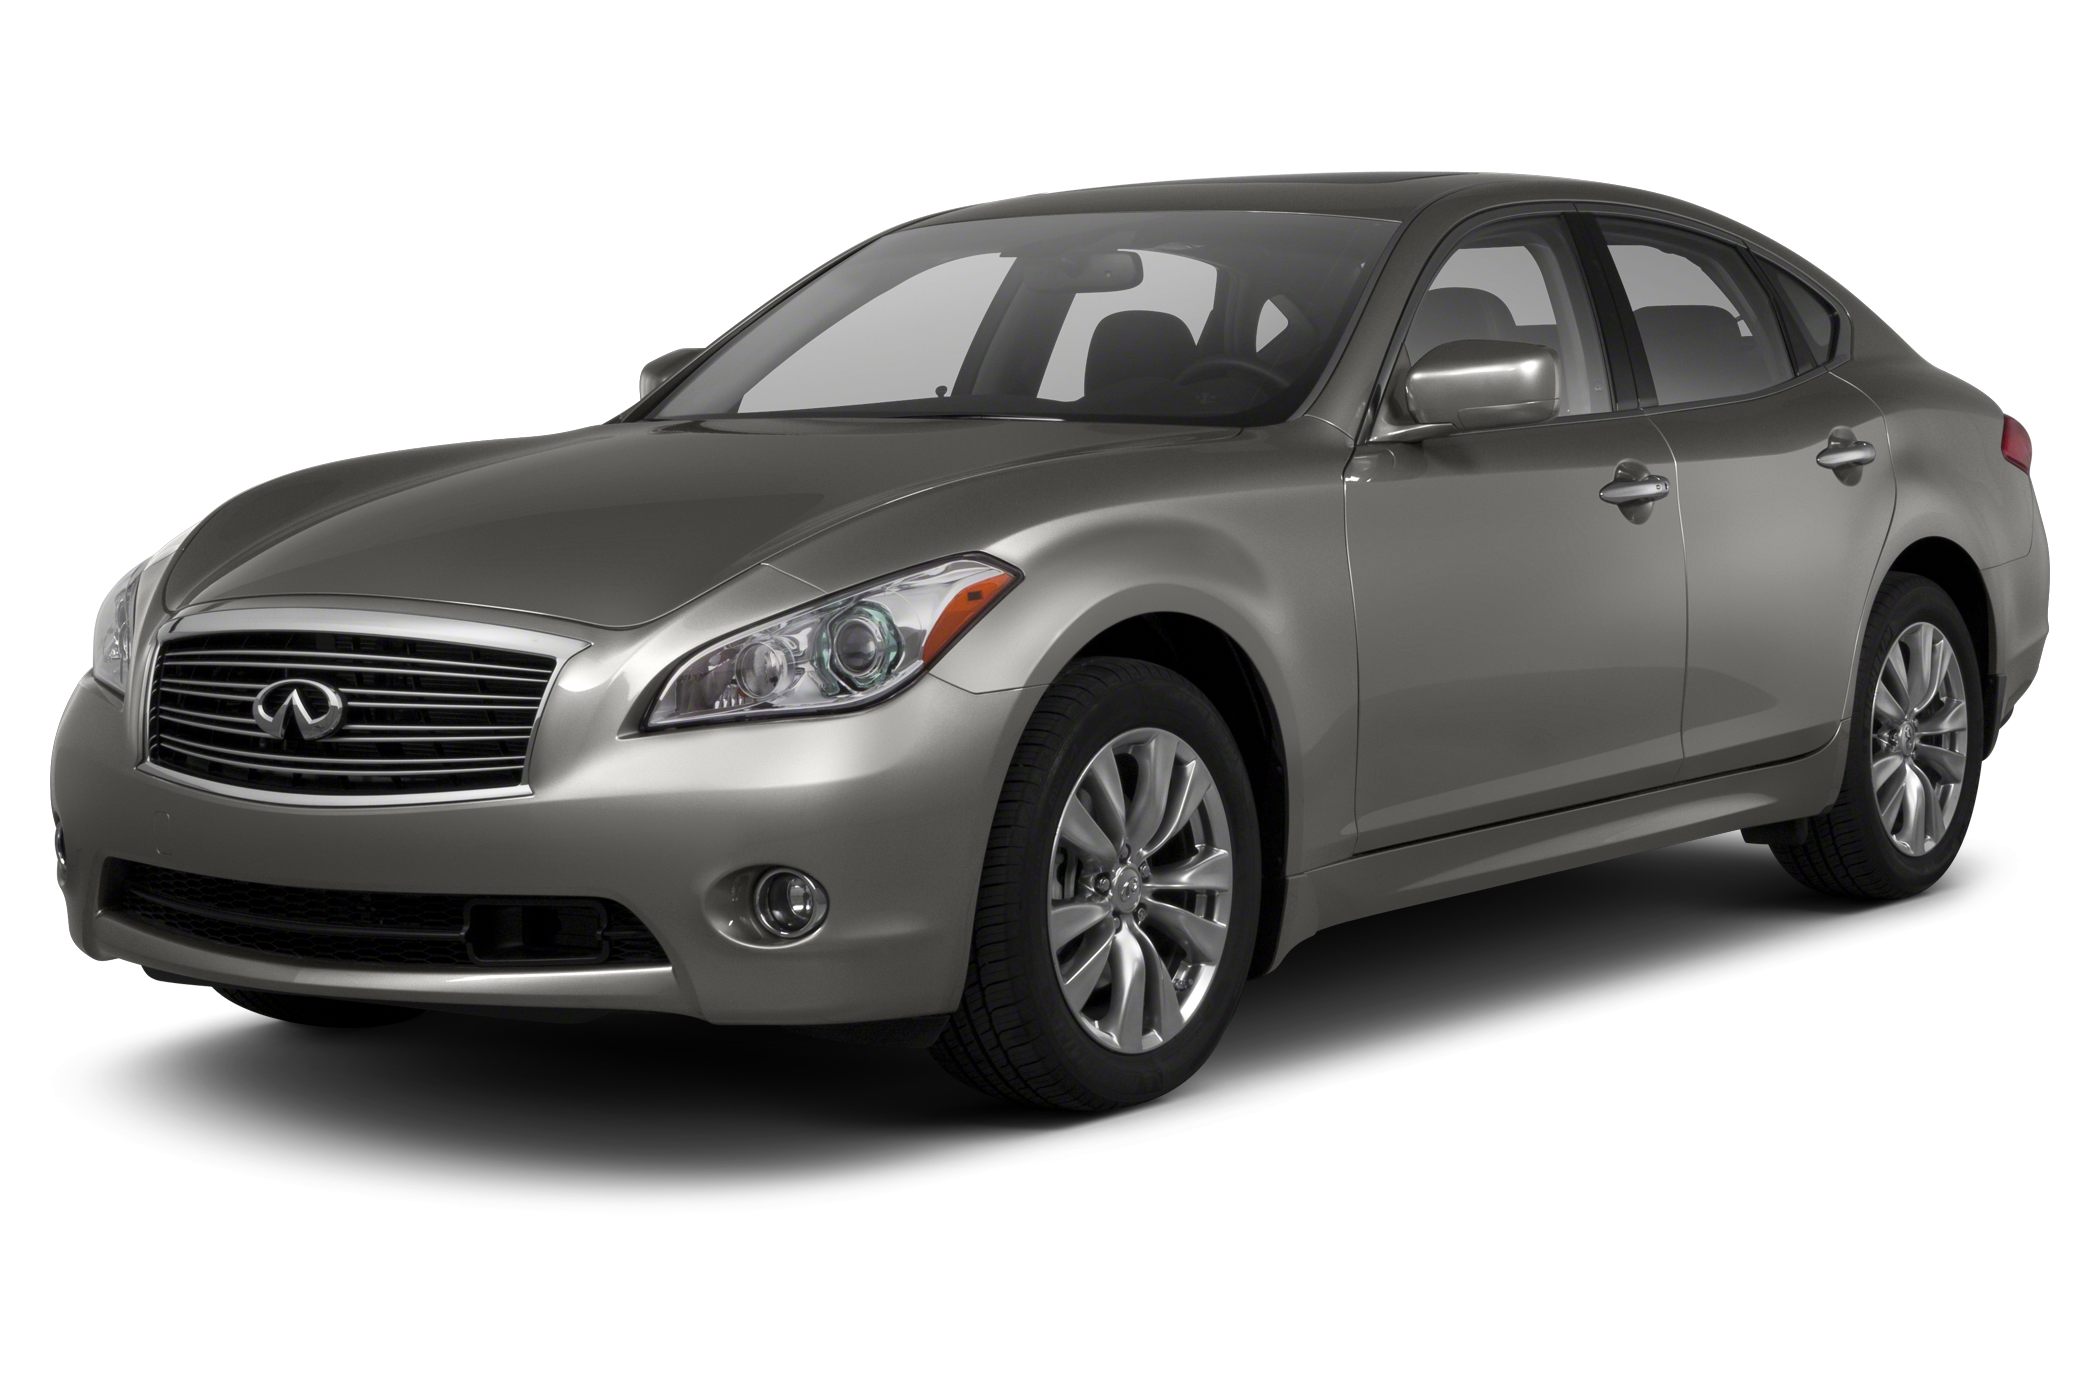 INFINITI M56x Prices, Reviews and New Model Information - Autoblog